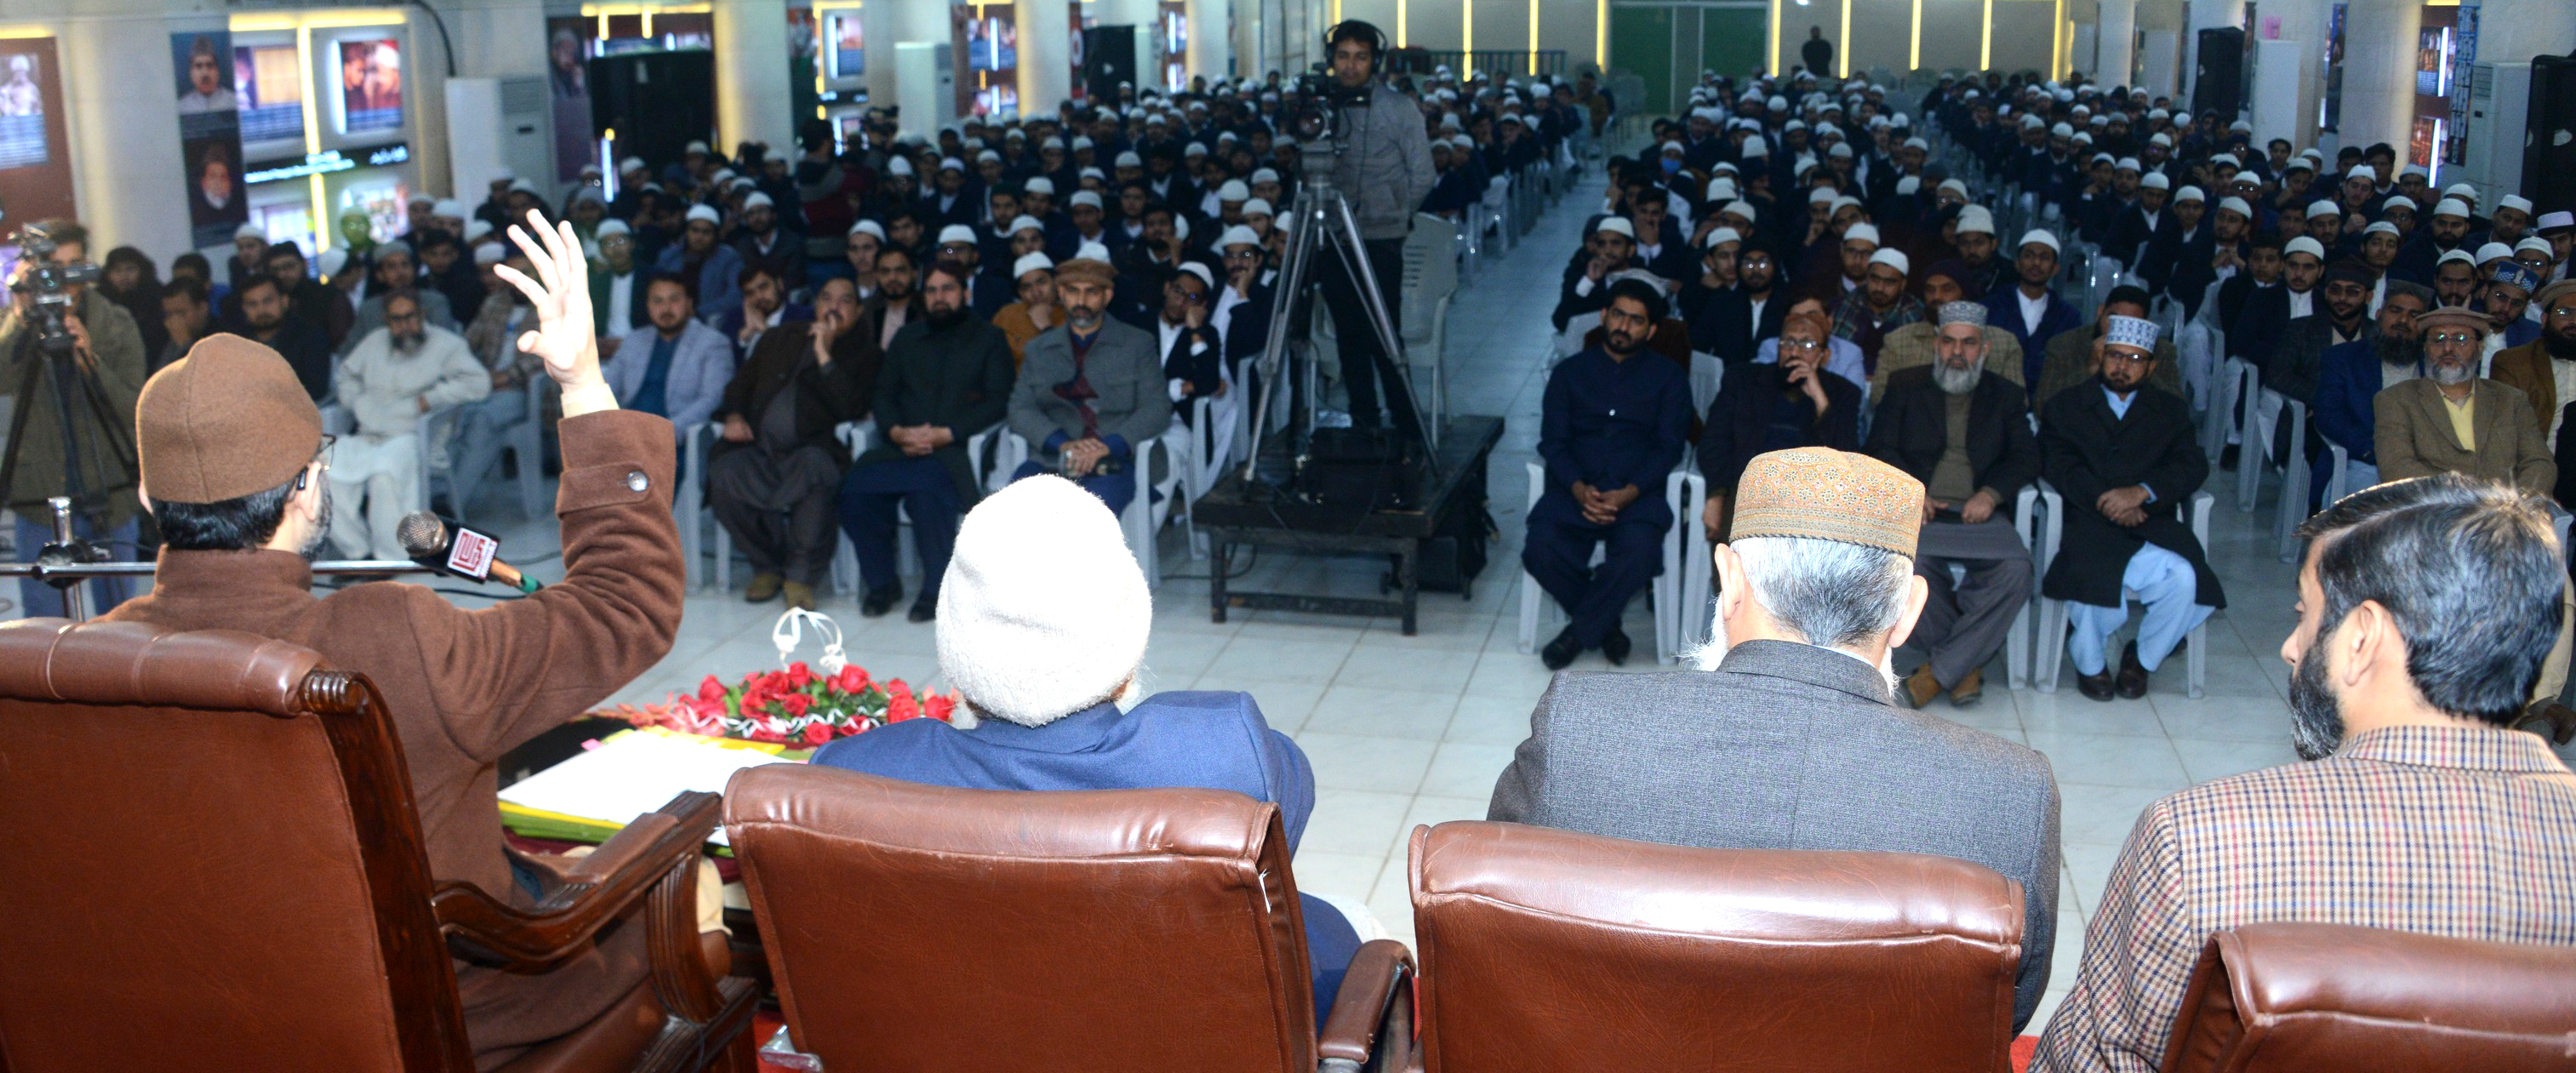 Dr. Hassan-Qadri Session with Cosis Students